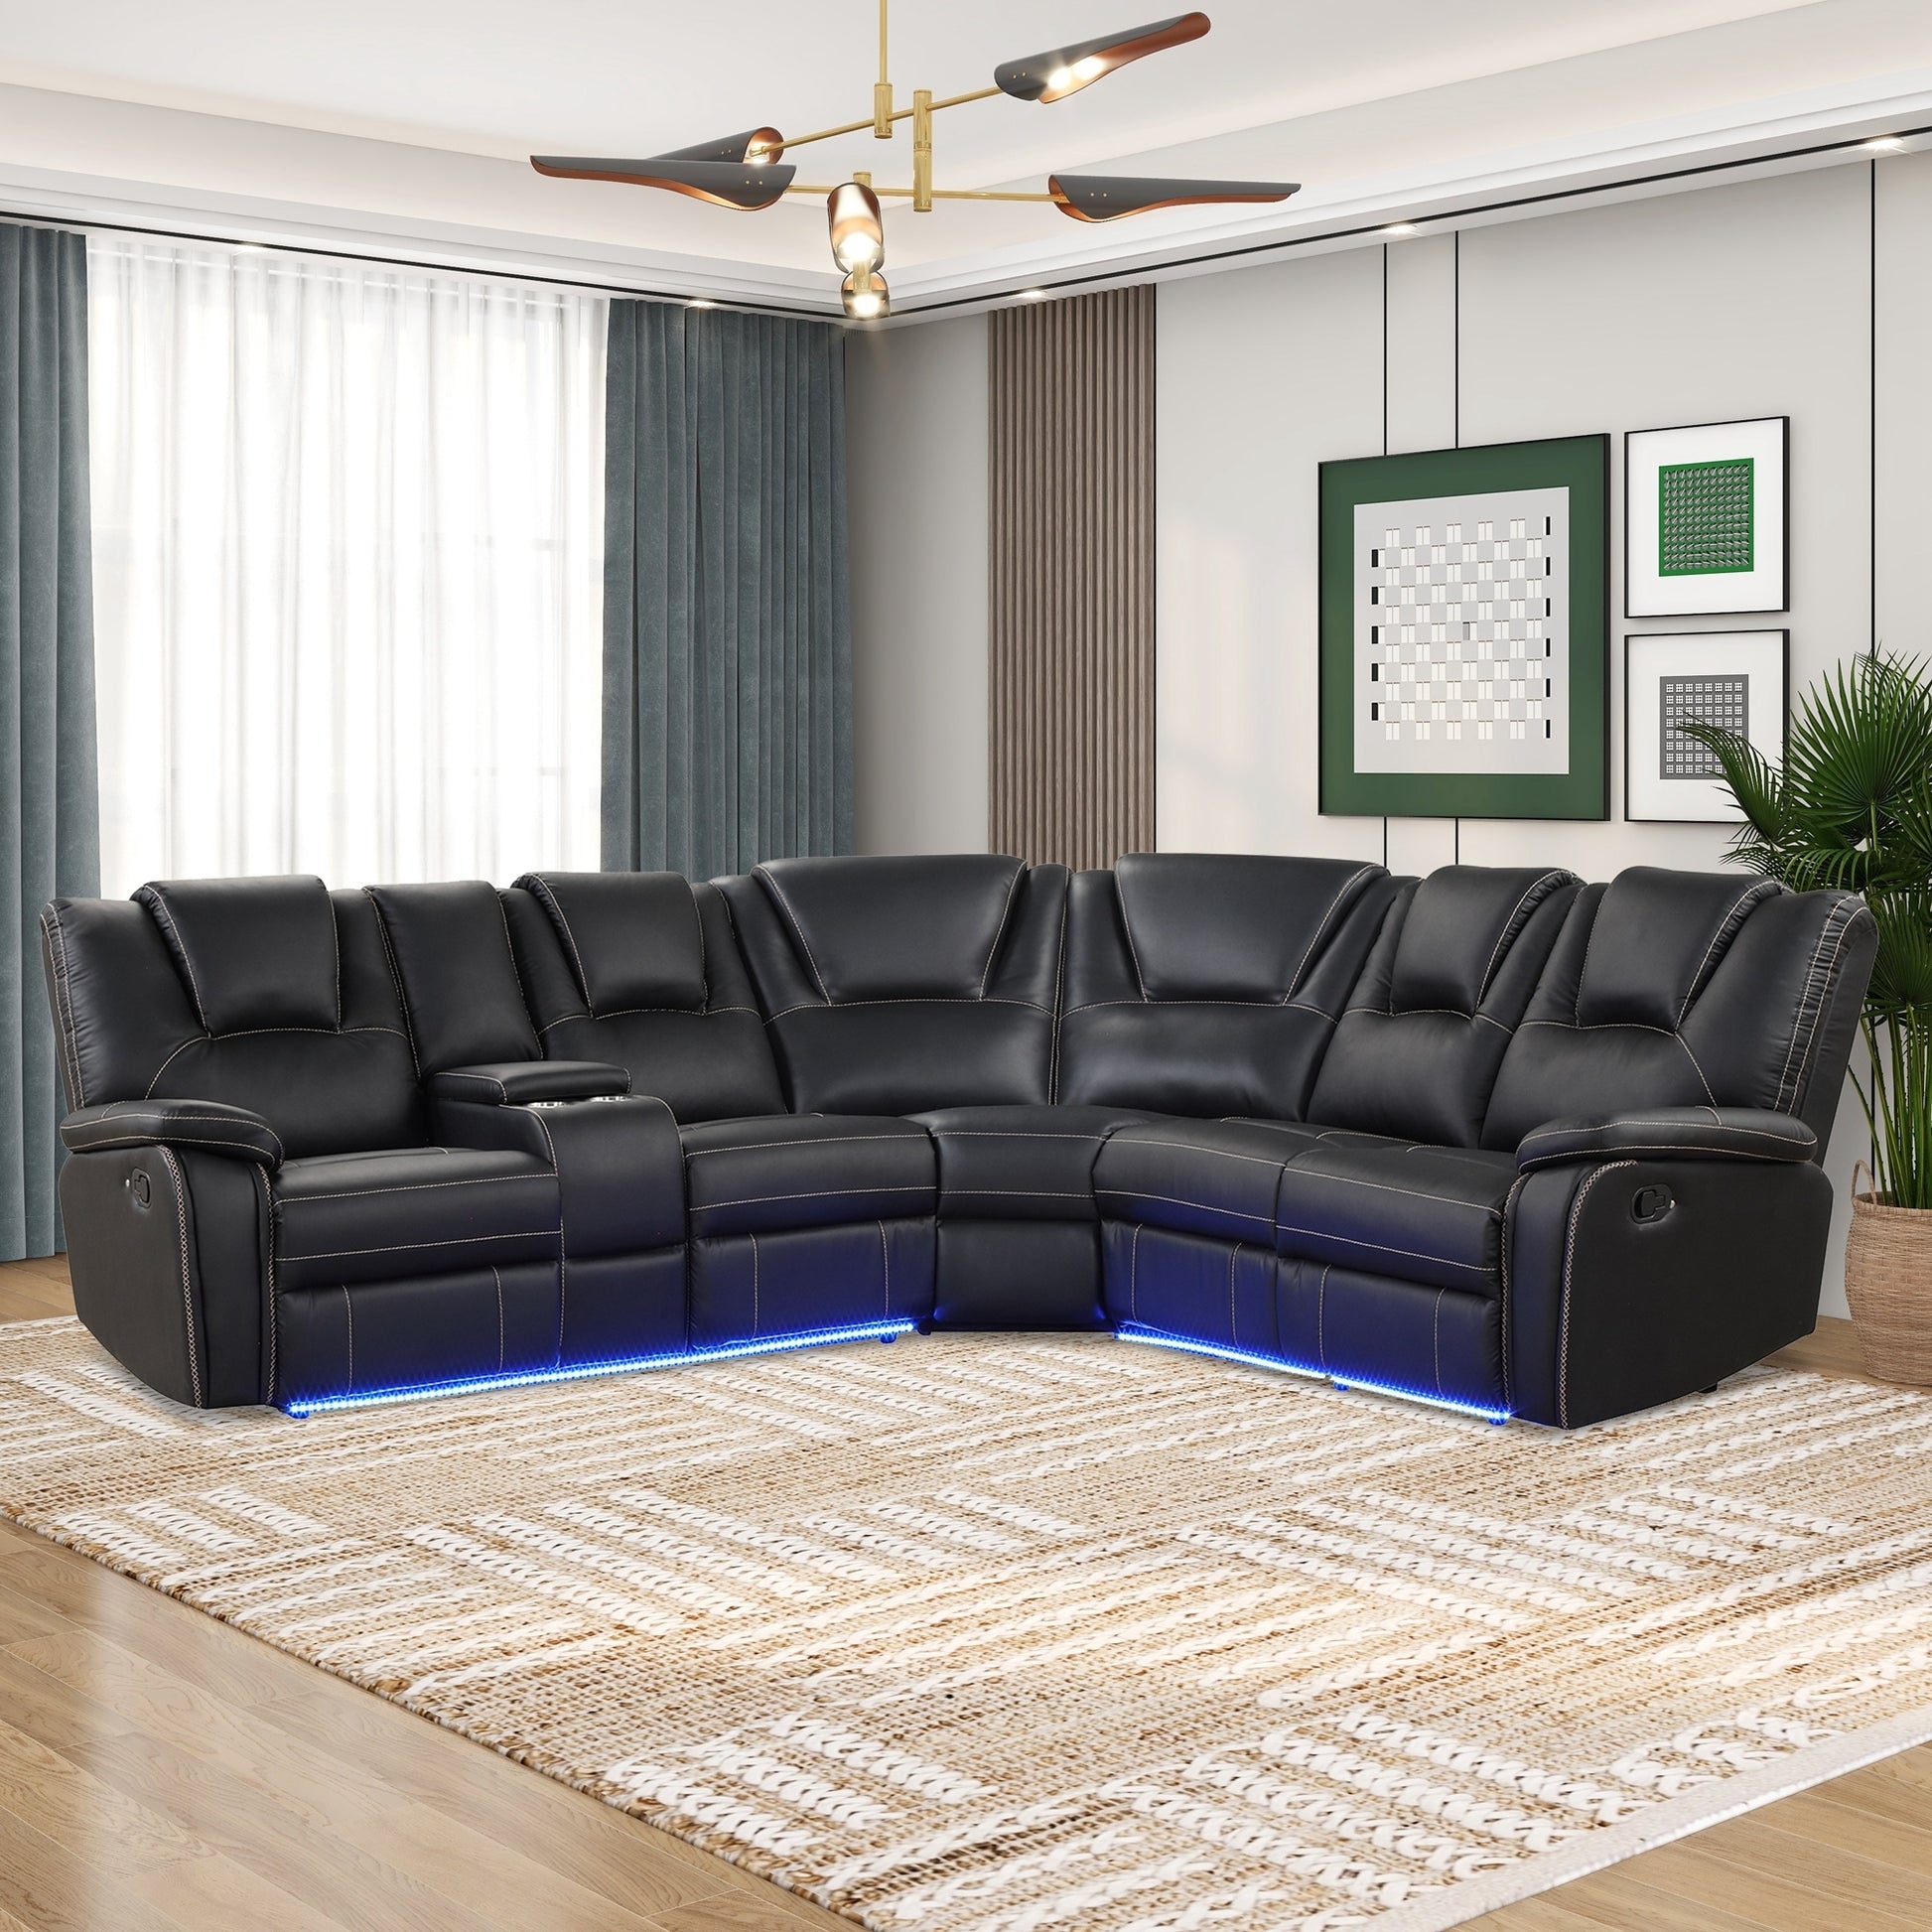 Leather Recliner, LED Console, Living Room Set